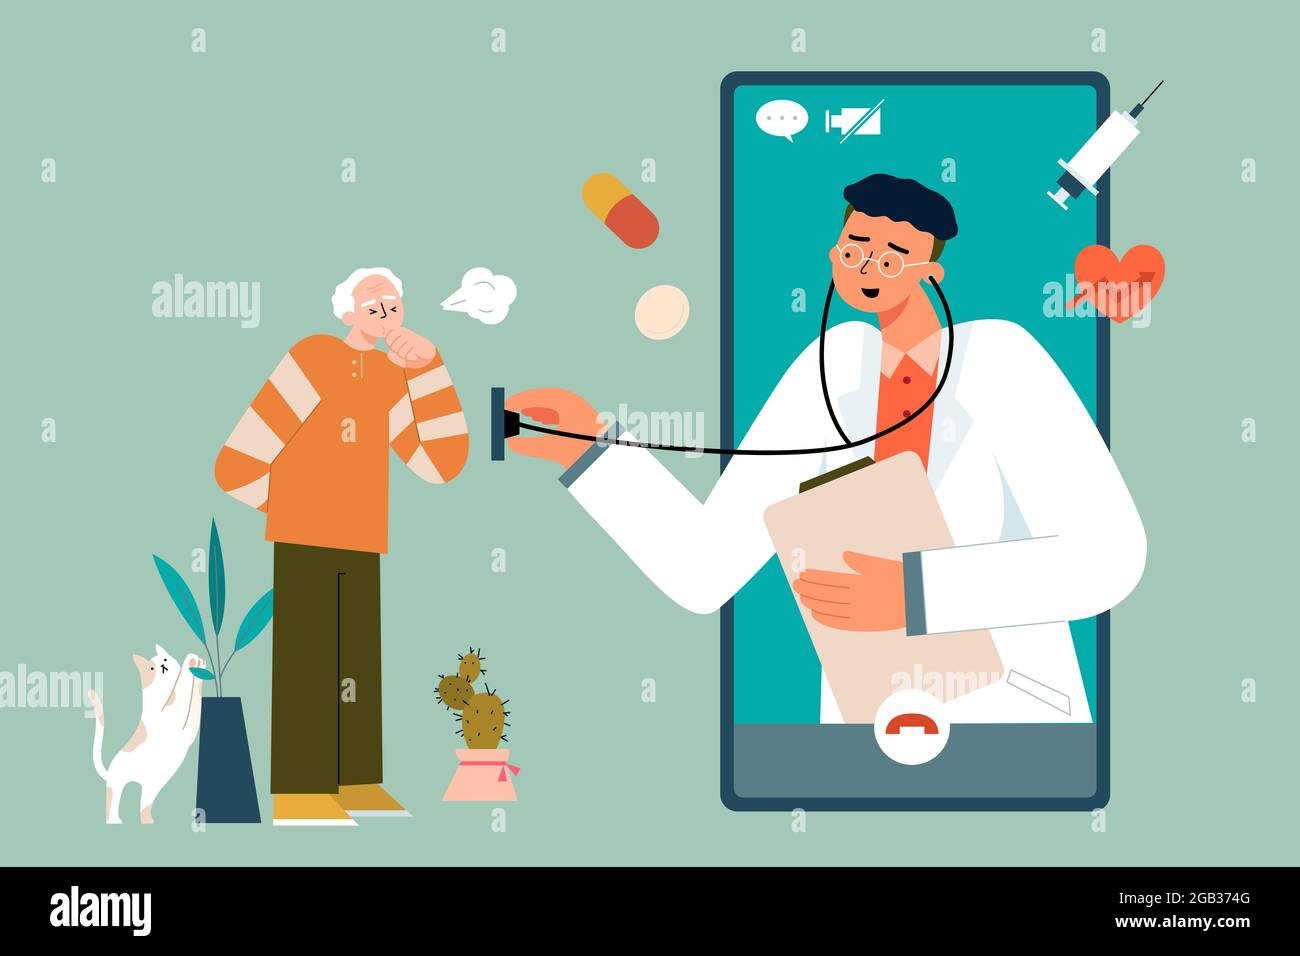 https://c8.alamy.com/comp/2GB374G/flat-illustration-of-doctor-examining-medical-condition-of-elderly-male-patient-via-video-call-concept-of-telemedicine-delivering-care-at-a-distance-2GB374G.jpg